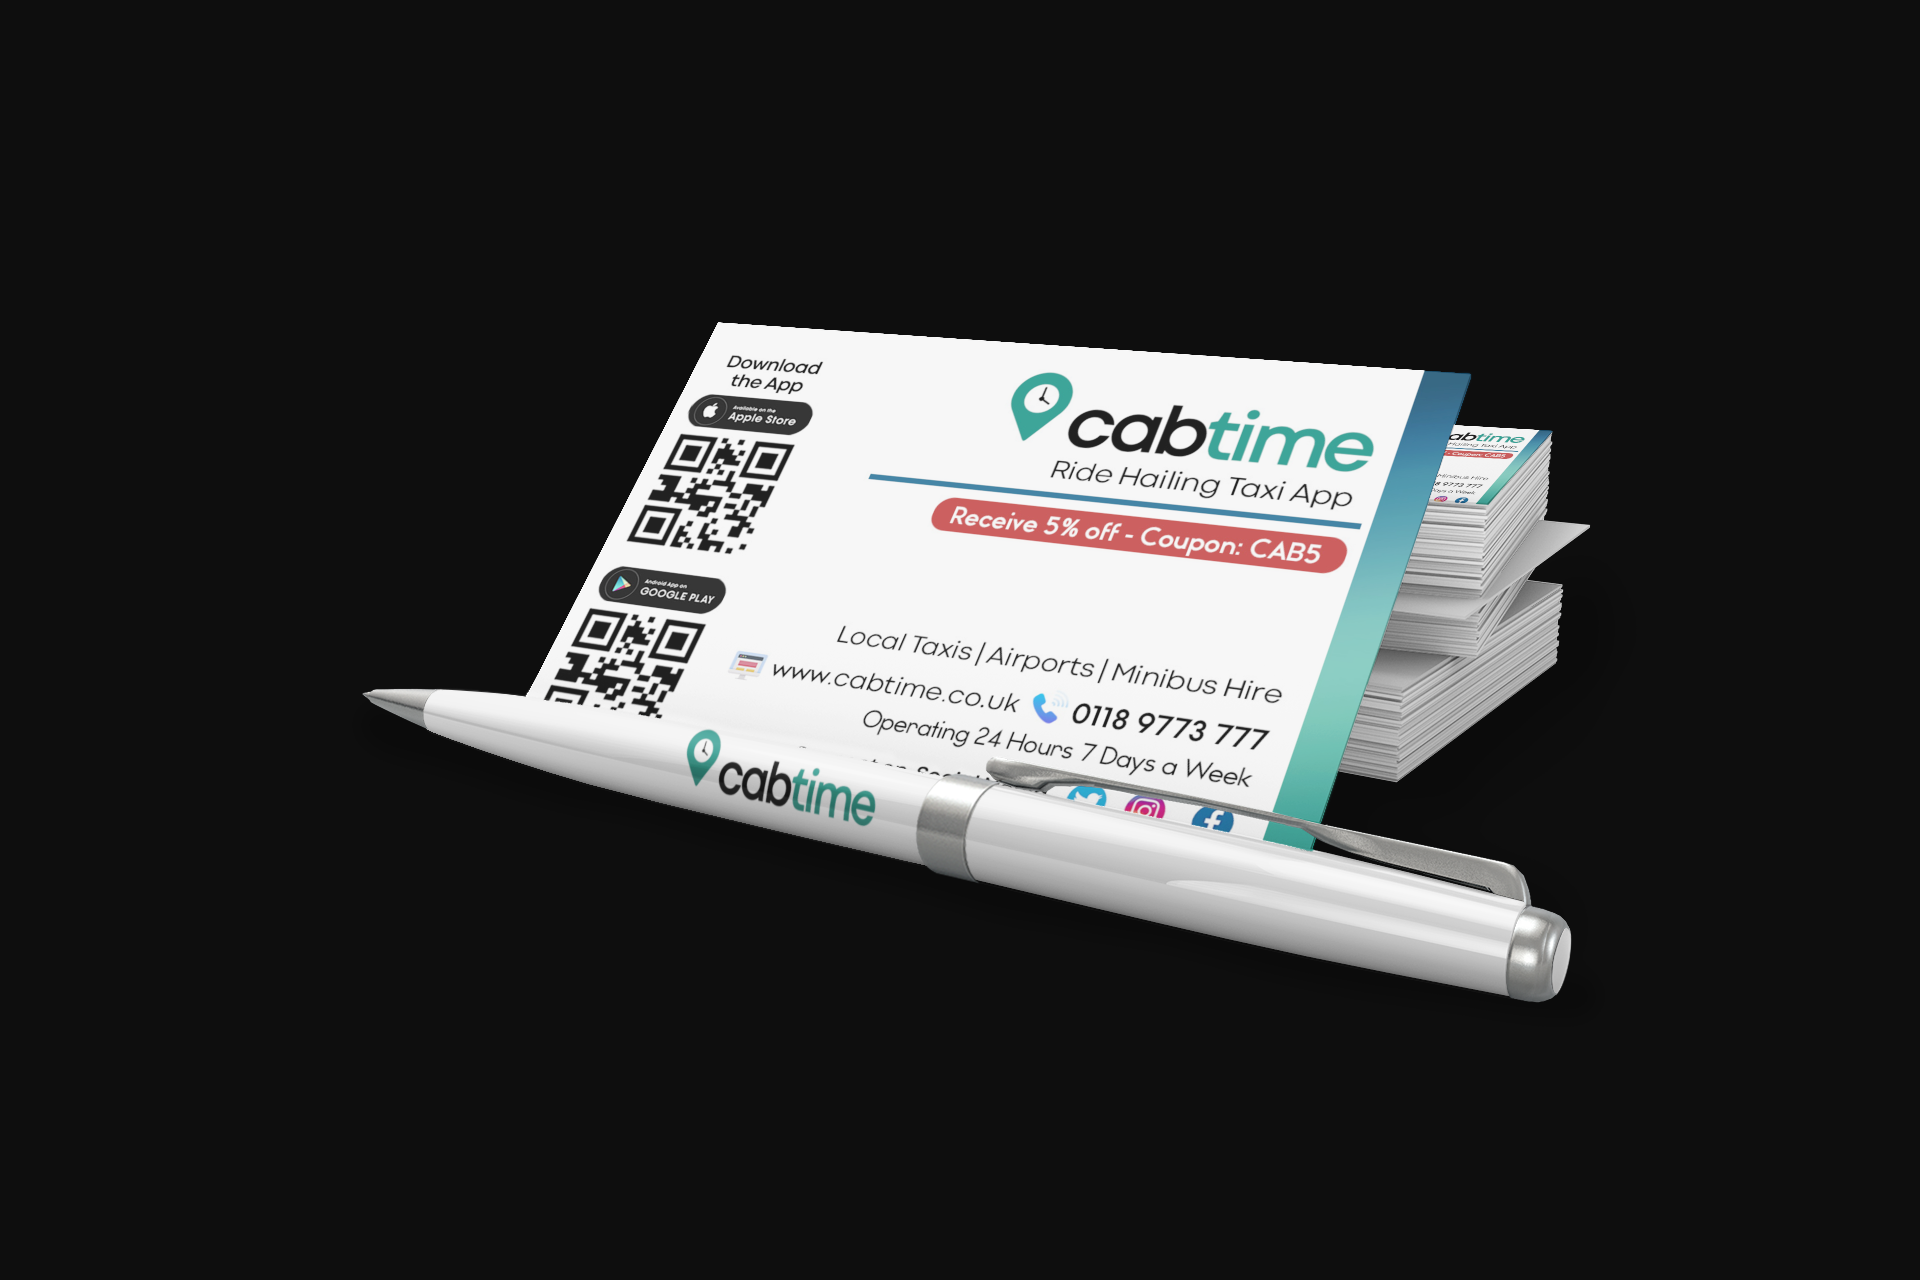 A stack of CabTime business cards a pen